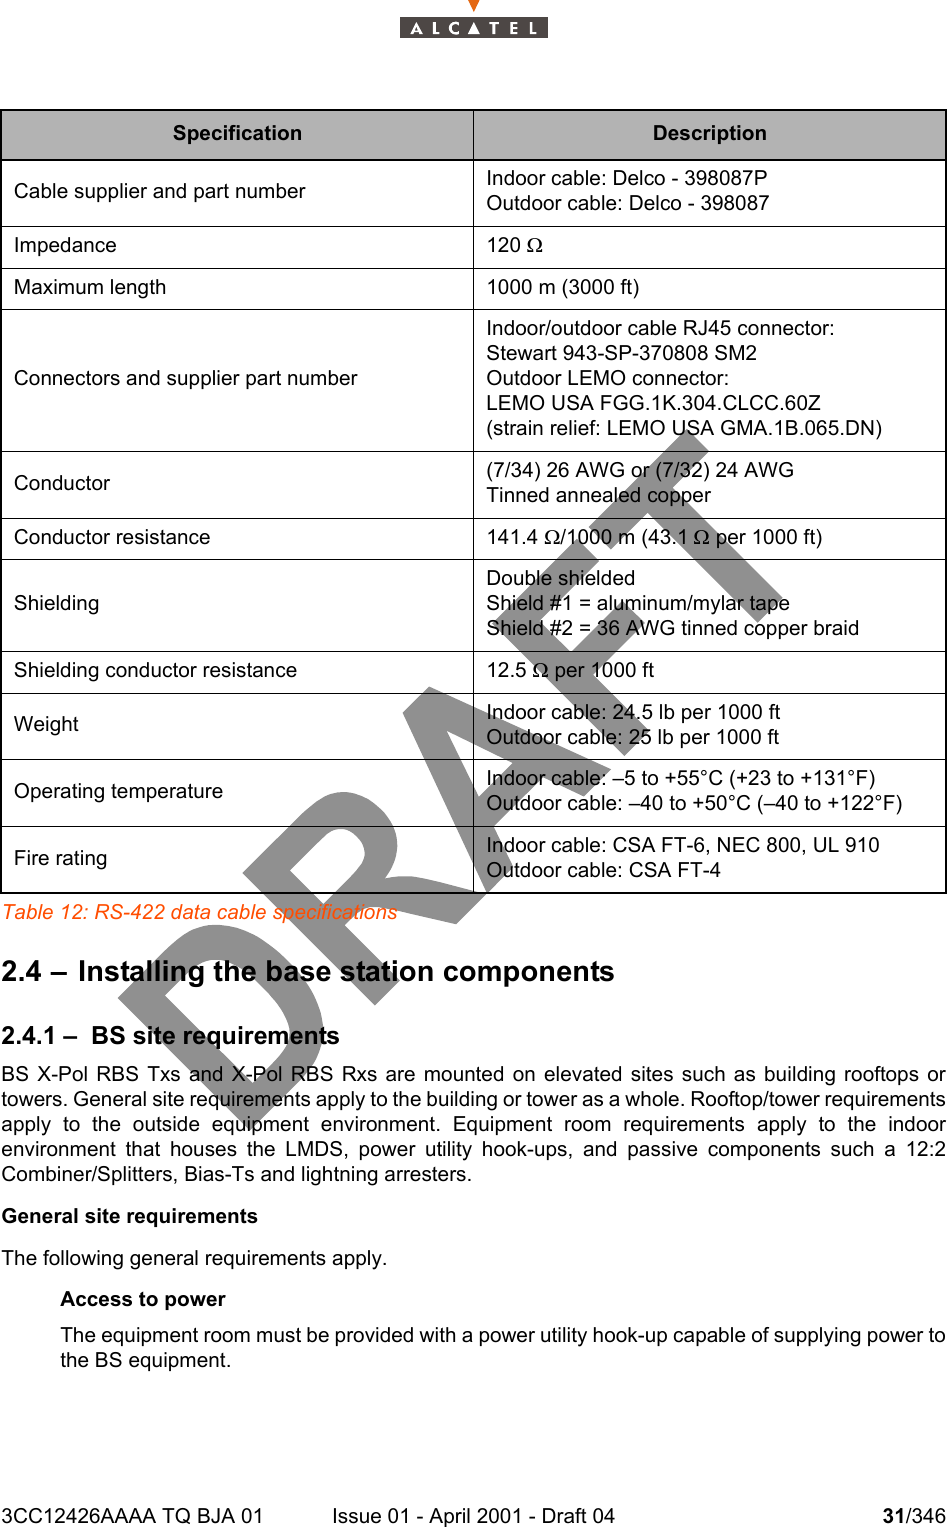 3CC12426AAAA TQ BJA 01 Issue 01 - April 2001 - Draft 04 31/346104Table 12: RS-422 data cable specifications2.4 – Installing the base station components2.4.1 – BS site requirementsBS X-Pol RBS Txs and X-Pol RBS Rxs are mounted on elevated sites such as building rooftops ortowers. General site requirements apply to the building or tower as a whole. Rooftop/tower requirementsapply to the outside equipment environment. Equipment room requirements apply to the indoorenvironment that houses the LMDS, power utility hook-ups, and passive components such a 12:2Combiner/Splitters, Bias-Ts and lightning arresters.General site requirementsThe following general requirements apply.Access to powerThe equipment room must be provided with a power utility hook-up capable of supplying power tothe BS equipment.Specification DescriptionCable supplier and part number Indoor cable: Delco - 398087POutdoor cable: Delco - 398087Impedance 120 WMaximum length 1000 m (3000 ft)Connectors and supplier part numberIndoor/outdoor cable RJ45 connector:Stewart 943-SP-370808 SM2Outdoor LEMO connector:LEMO USA FGG.1K.304.CLCC.60Z(strain relief: LEMO USA GMA.1B.065.DN)Conductor (7/34) 26 AWG or (7/32) 24 AWGTinned annealed copperConductor resistance 141.4 W/1000 m (43.1 W per 1000 ft)ShieldingDouble shieldedShield #1 = aluminum/mylar tapeShield #2 = 36 AWG tinned copper braidShielding conductor resistance 12.5 W per 1000 ftWeight Indoor cable: 24.5 lb per 1000 ftOutdoor cable: 25 lb per 1000 ftOperating temperature Indoor cable: –5 to +55°C (+23 to +131°F)Outdoor cable: –40 to +50°C (–40 to +122°F)Fire rating Indoor cable: CSA FT-6, NEC 800, UL 910Outdoor cable: CSA FT-4